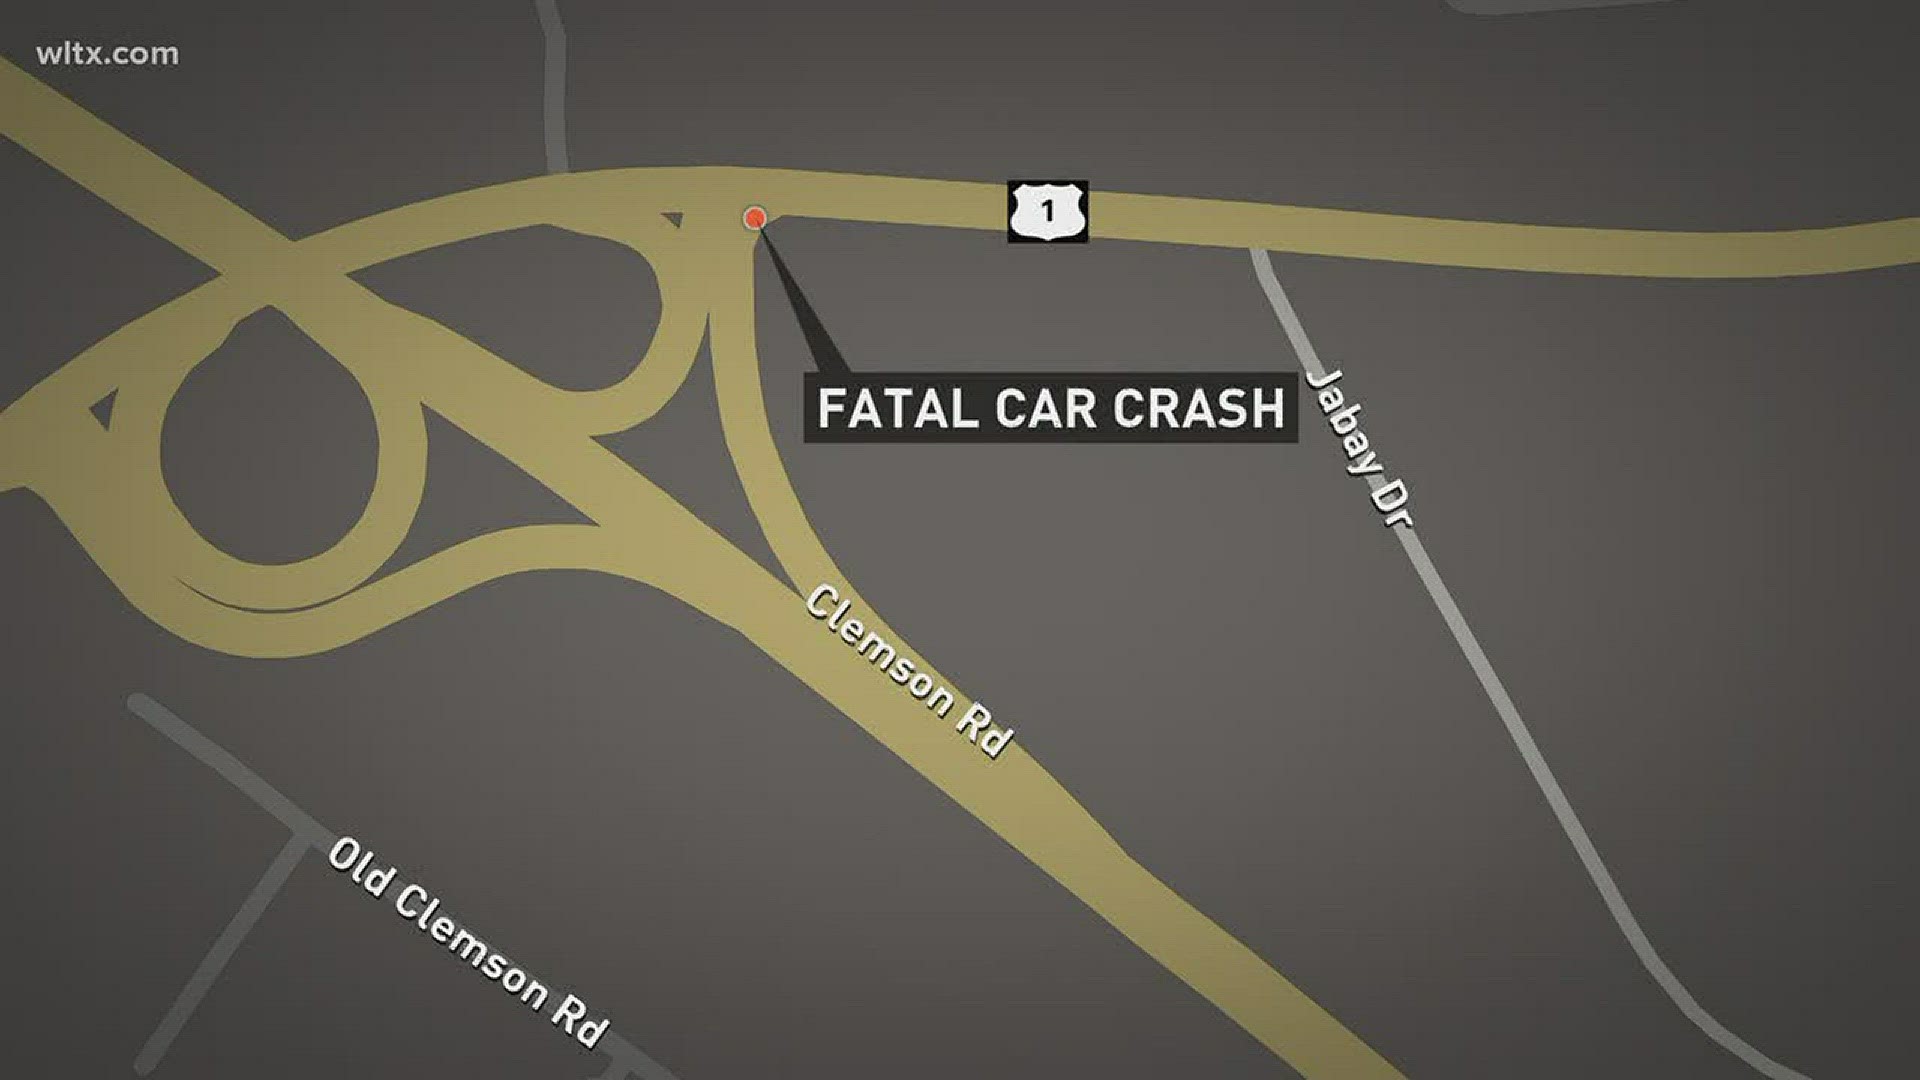 A teenager was killed in a car crash in Richland County.